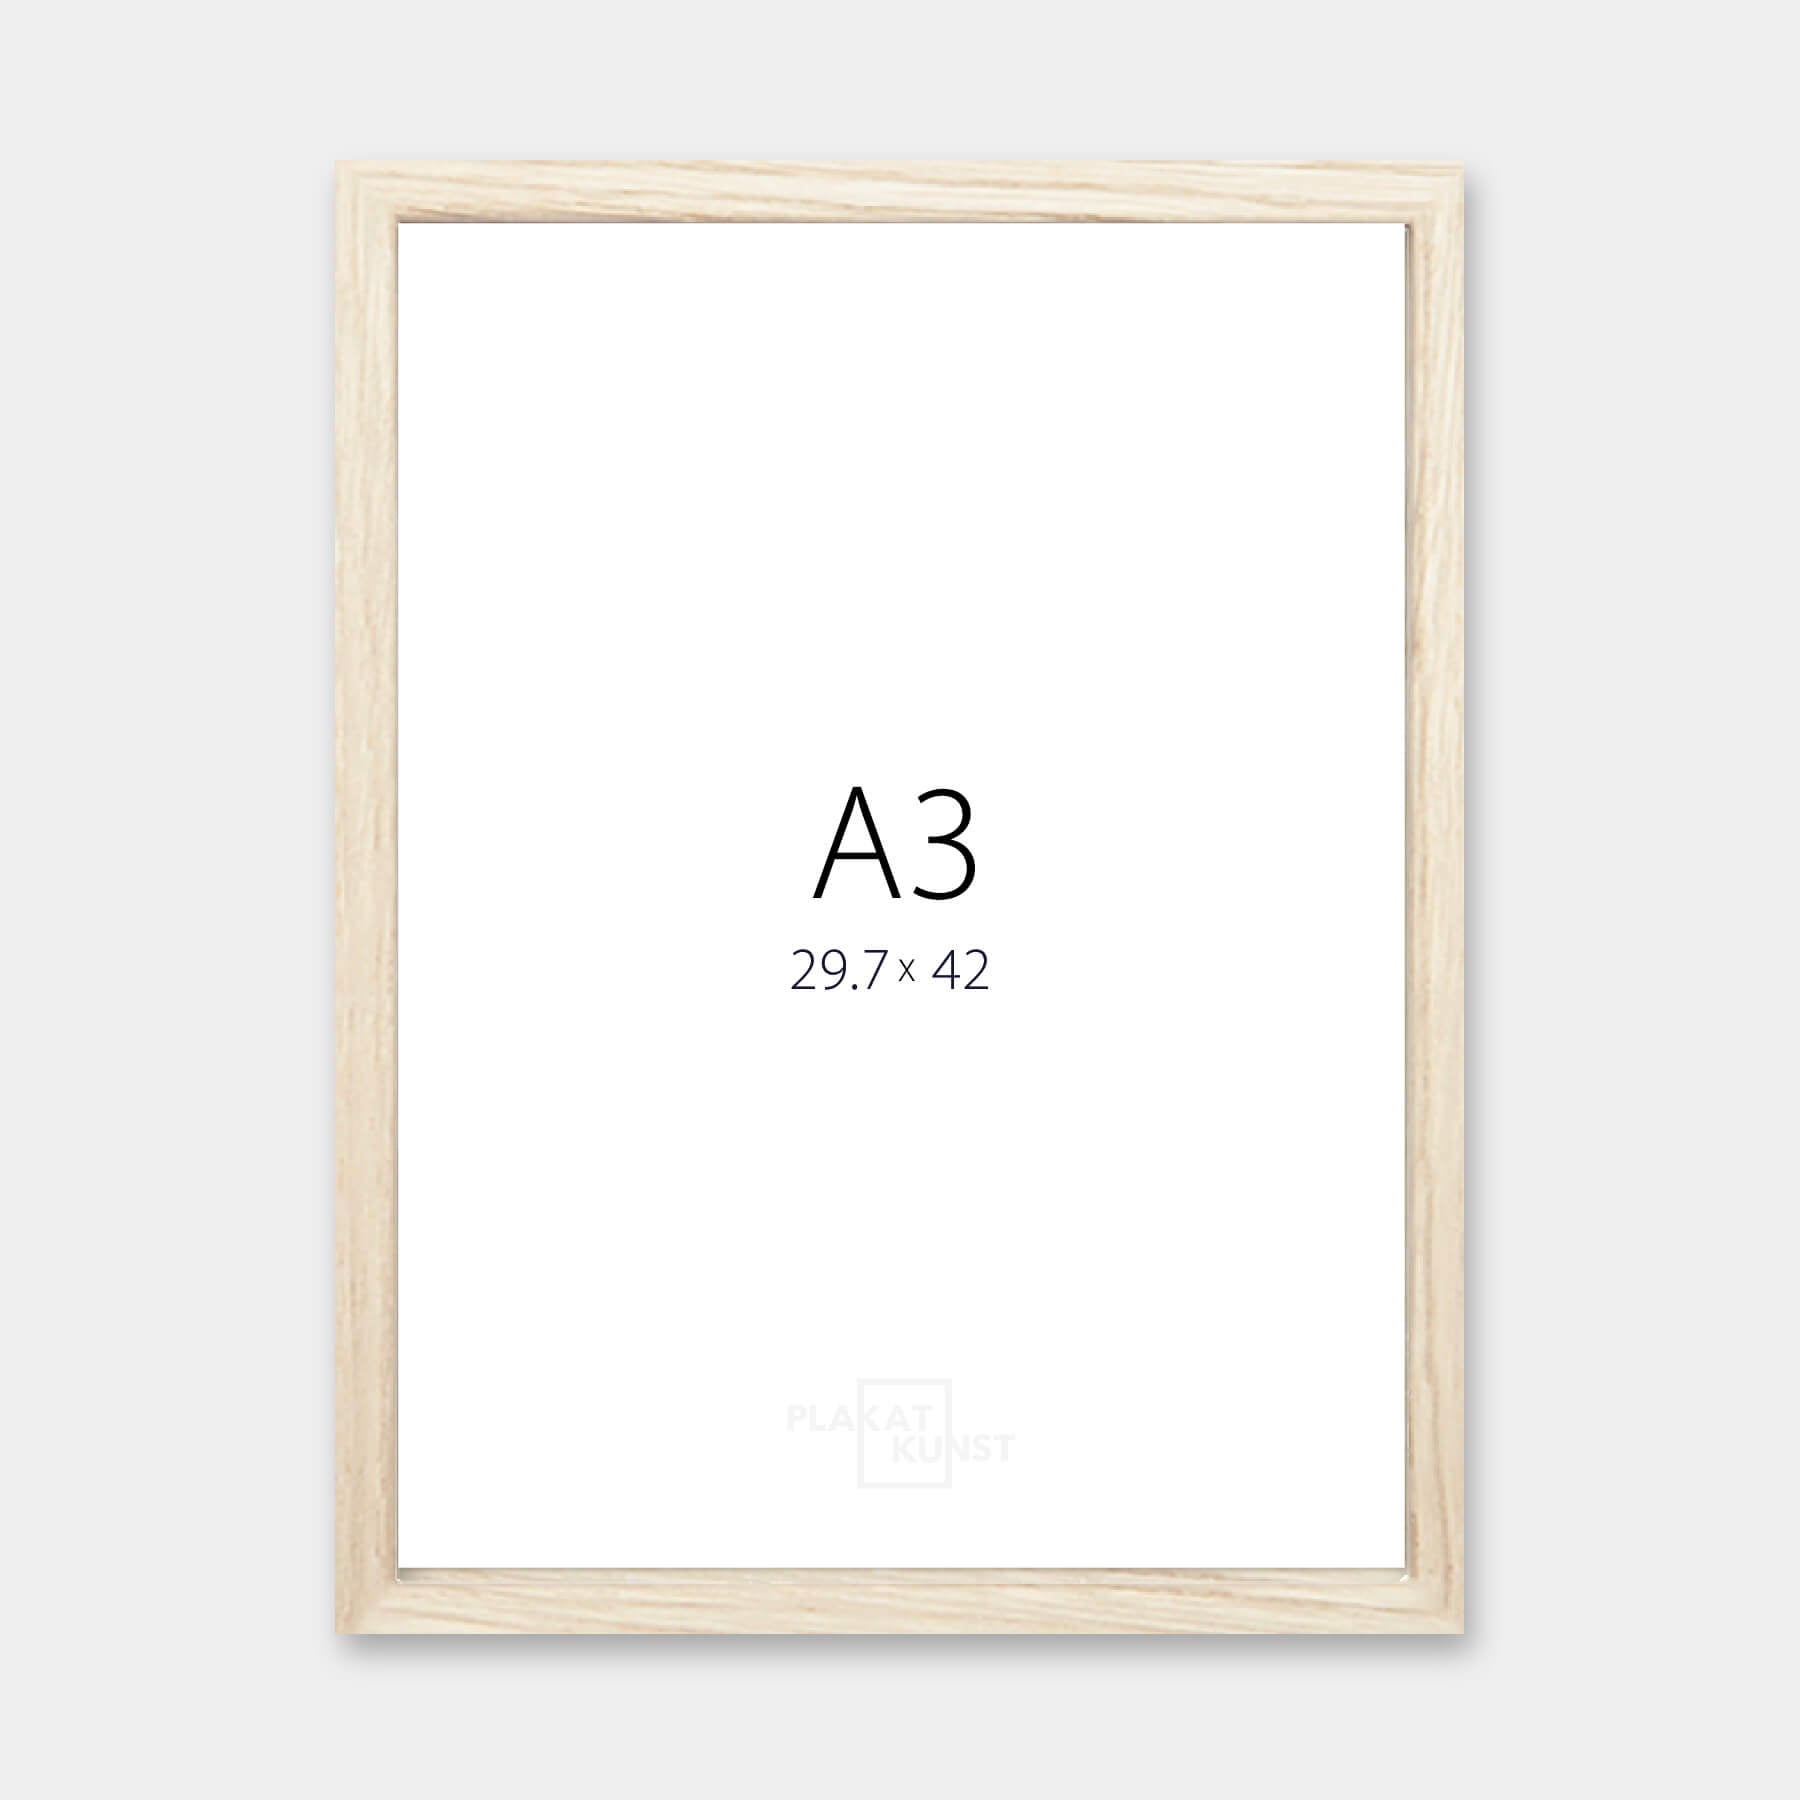 40x40 cm White Square Wood Box Poster Frame with clear glass - Photo Frames  and Picture Frames Online Store